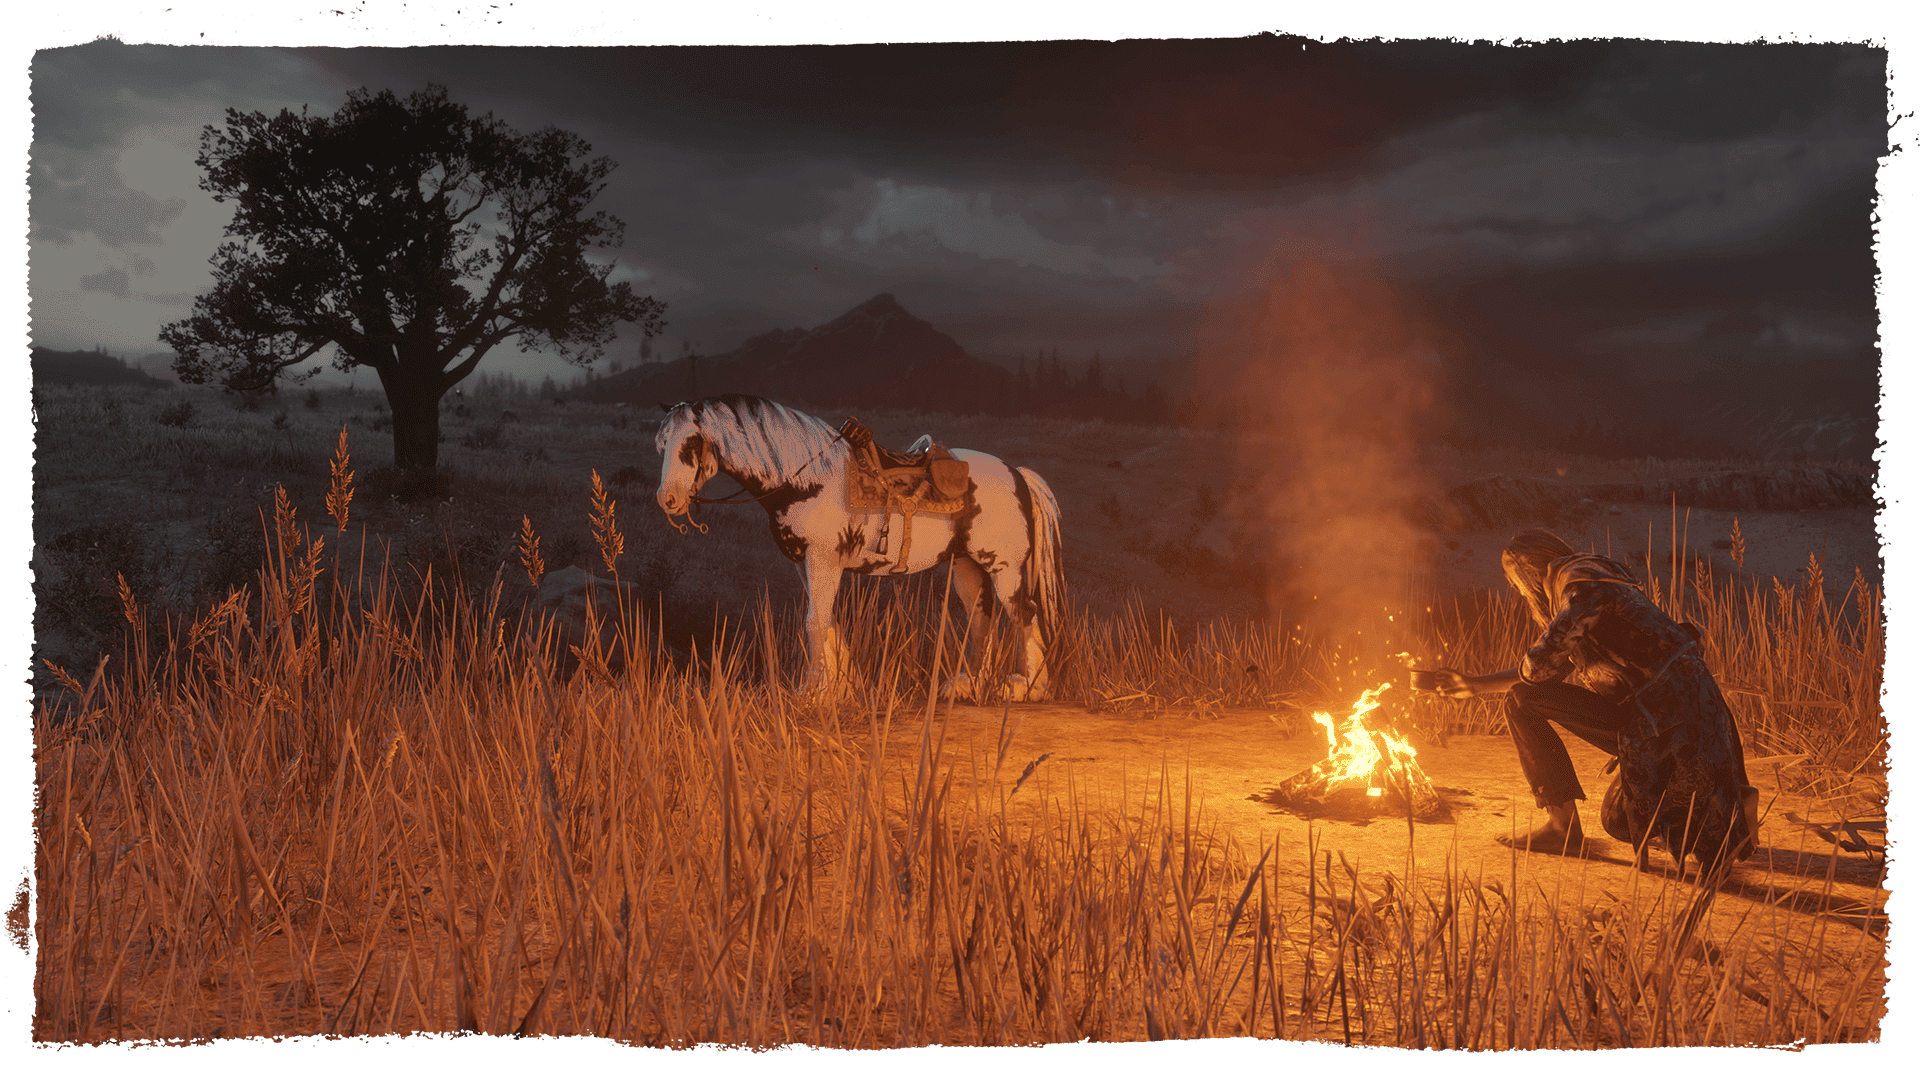 Woman crouched by fire with horse in the plains